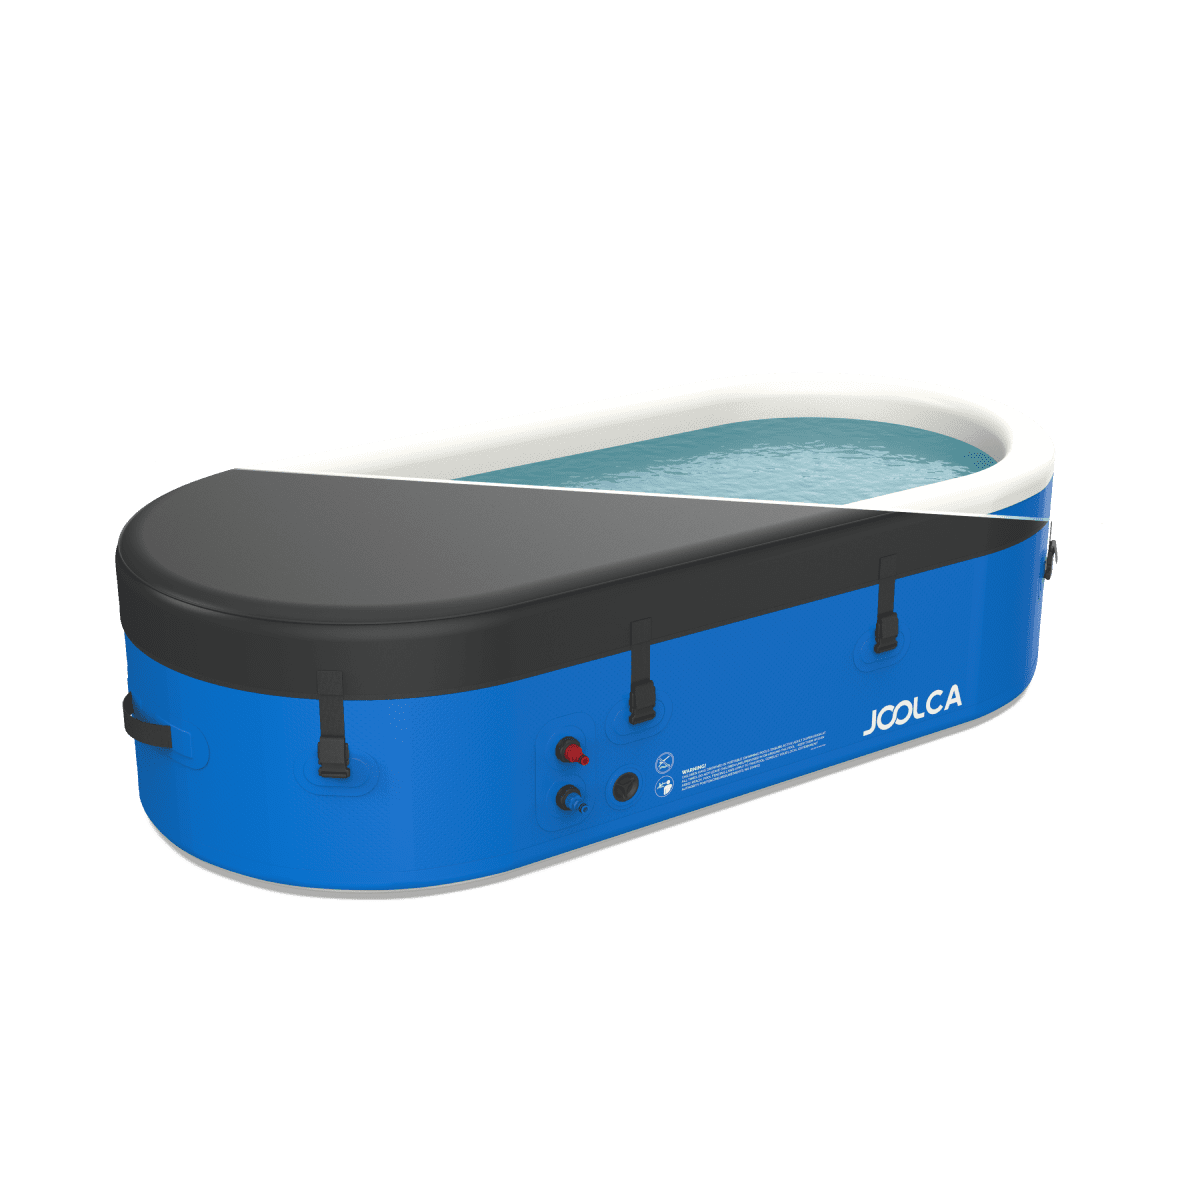 An image of an inflatable hot tub with an cover over half, showing water can be stored with it